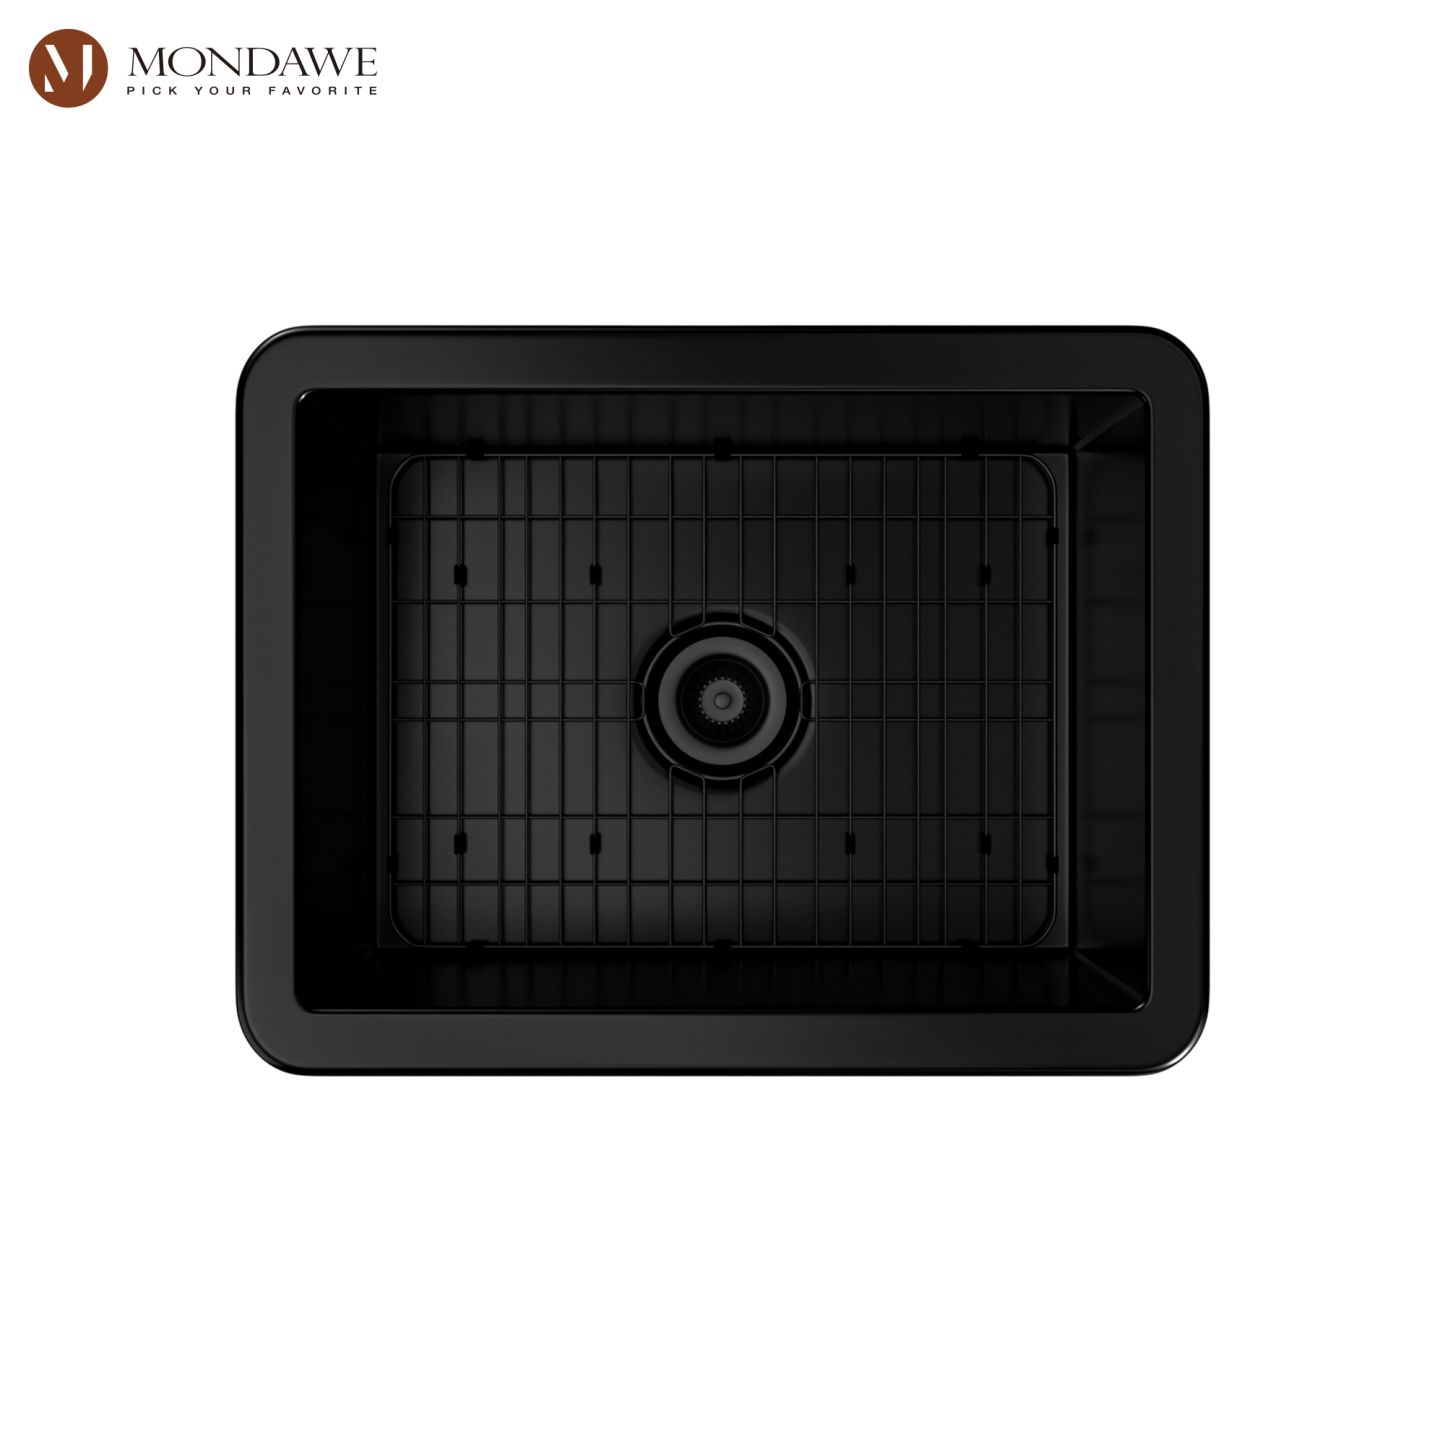 Undermount 24 In. Matte Black Single Bowl Fireclay Kitchen Sink Comes With Pull Down Kitchen Faucet-Mondawe